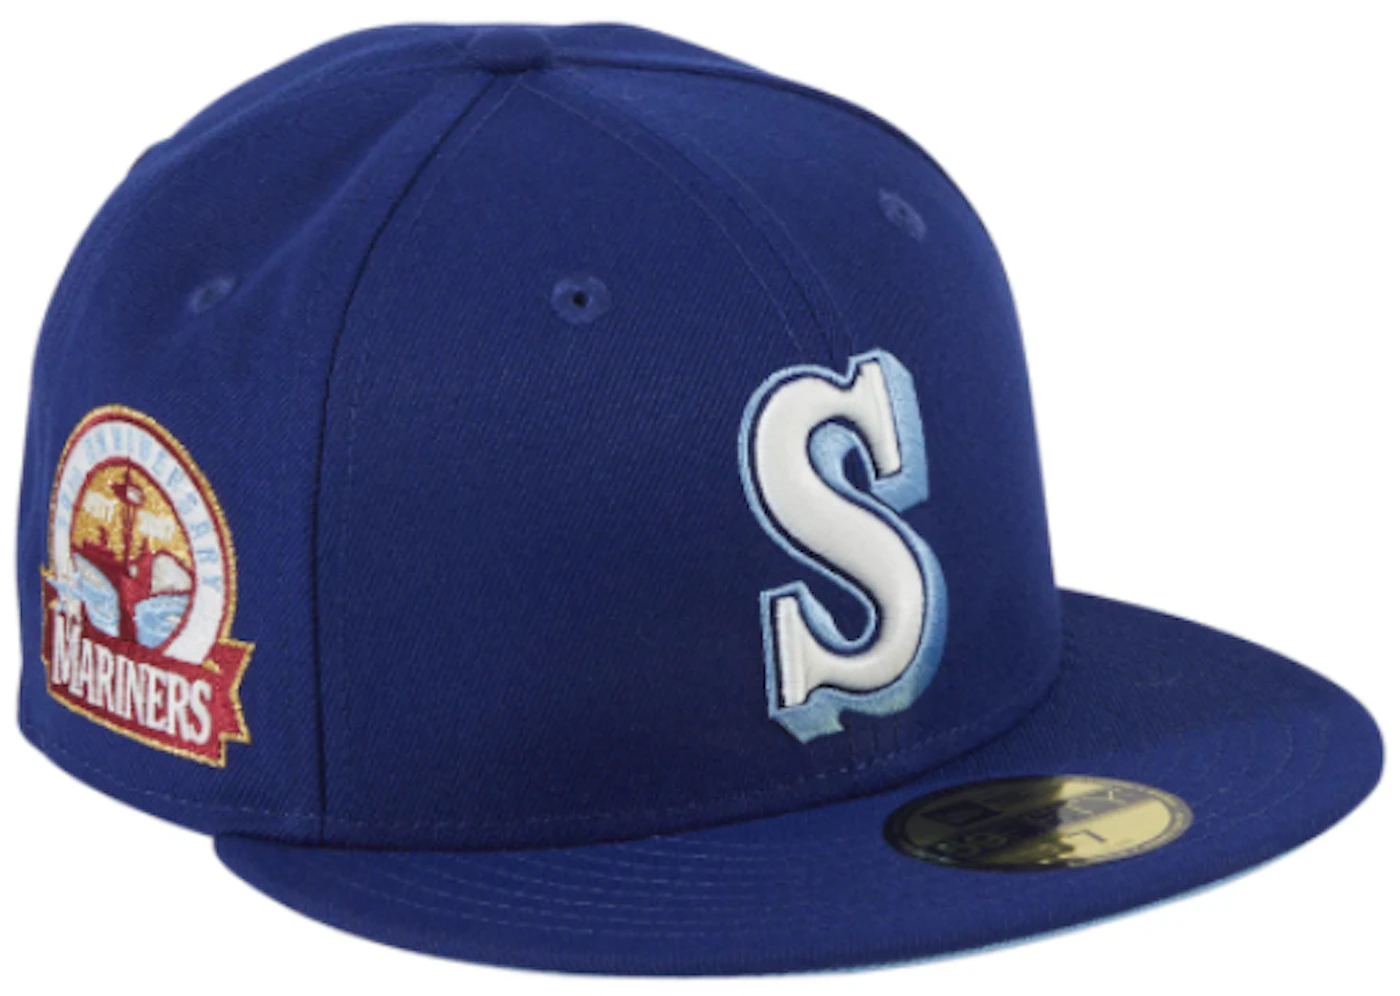 New Era 59Fifty Retro On-Field Seattle Mariners Hat - Navy, Teal – Hat Club